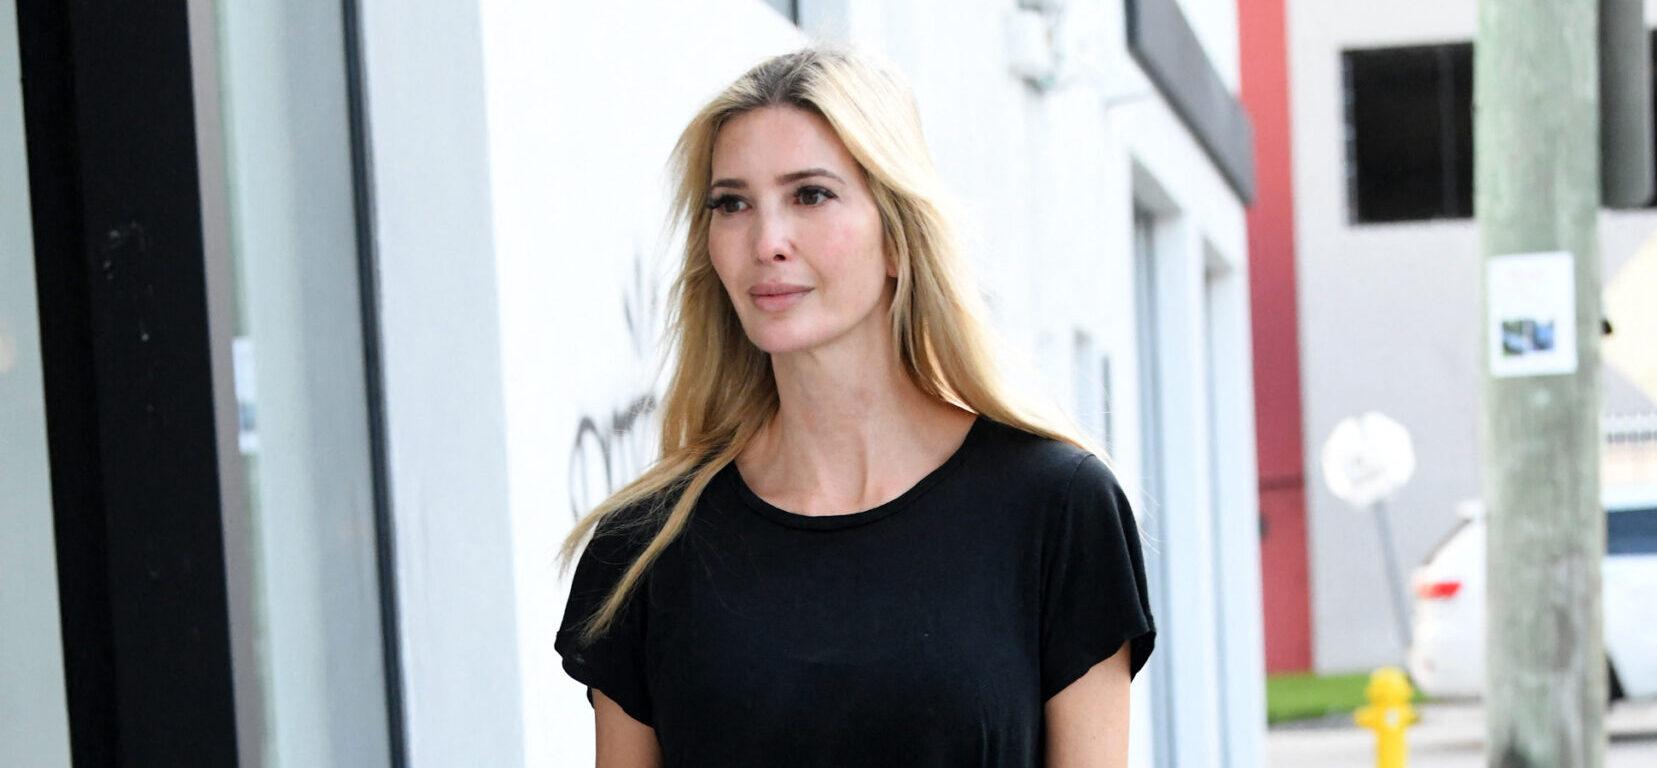 Ivanka Trump Is Ready To Go Surfing In Her Black Swimsuit